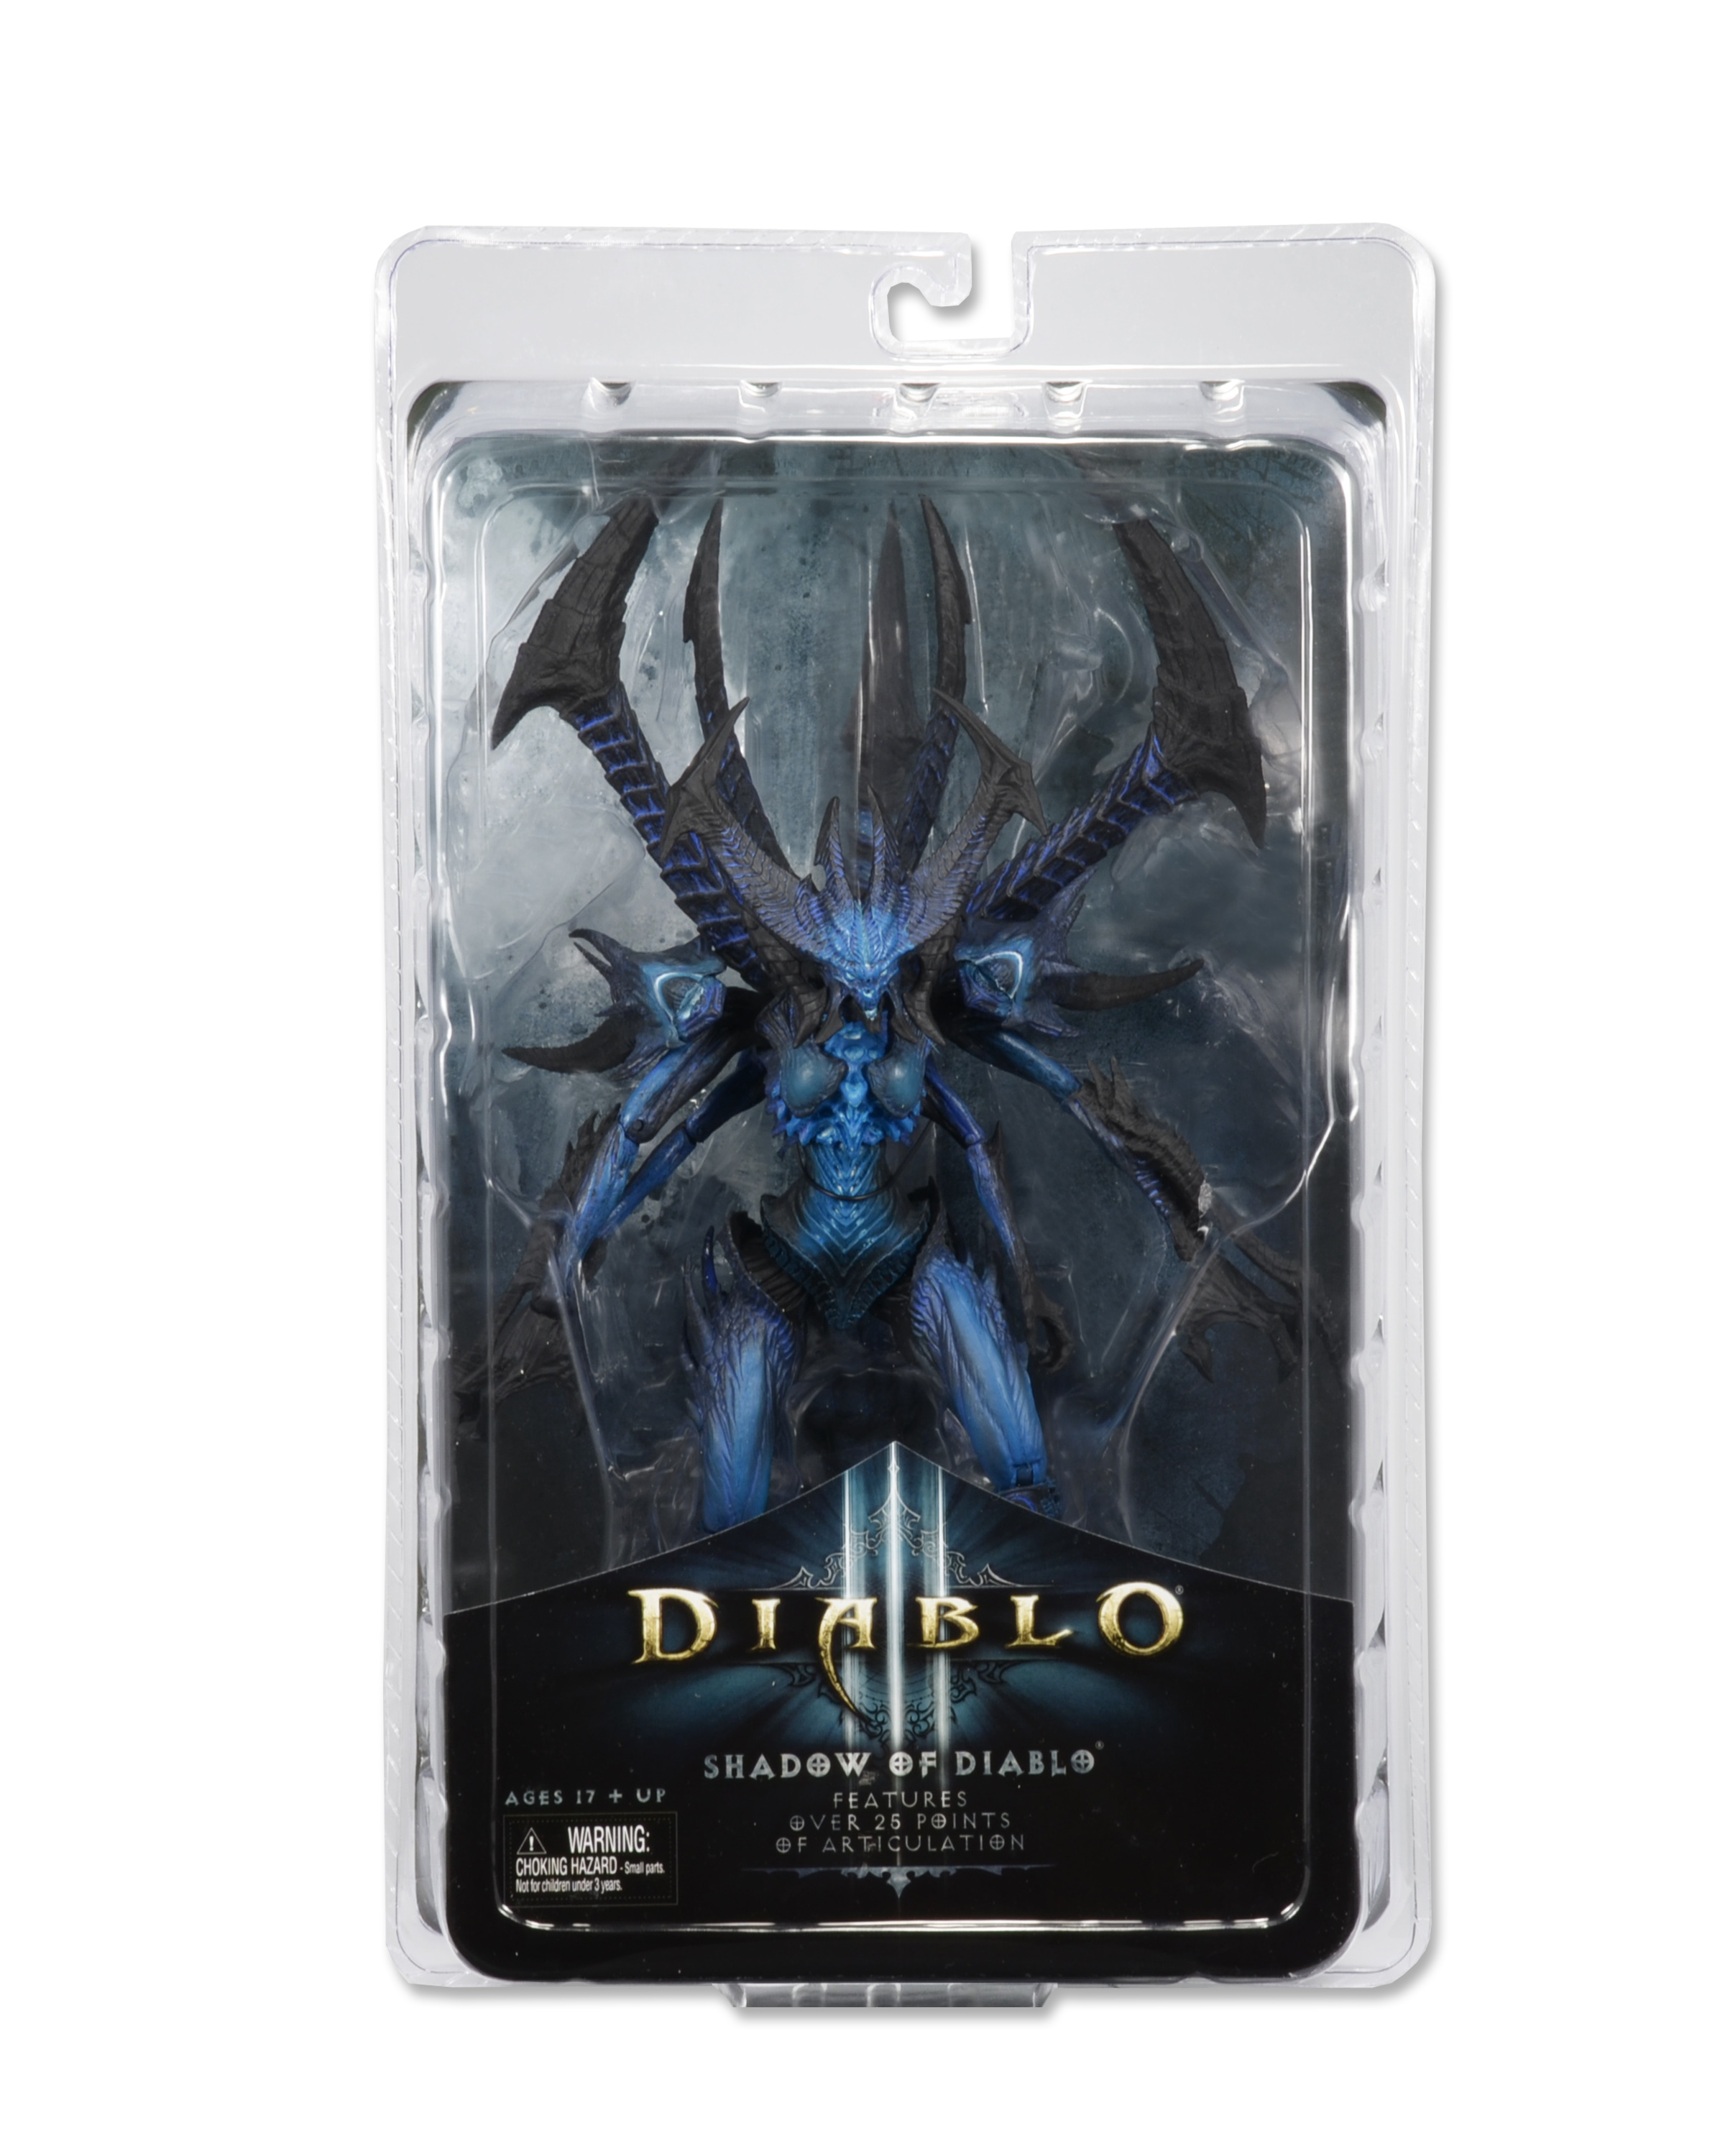 Newegg is the only place you'll be able to buy the Diablo Shadow Clone figurine this weekend.